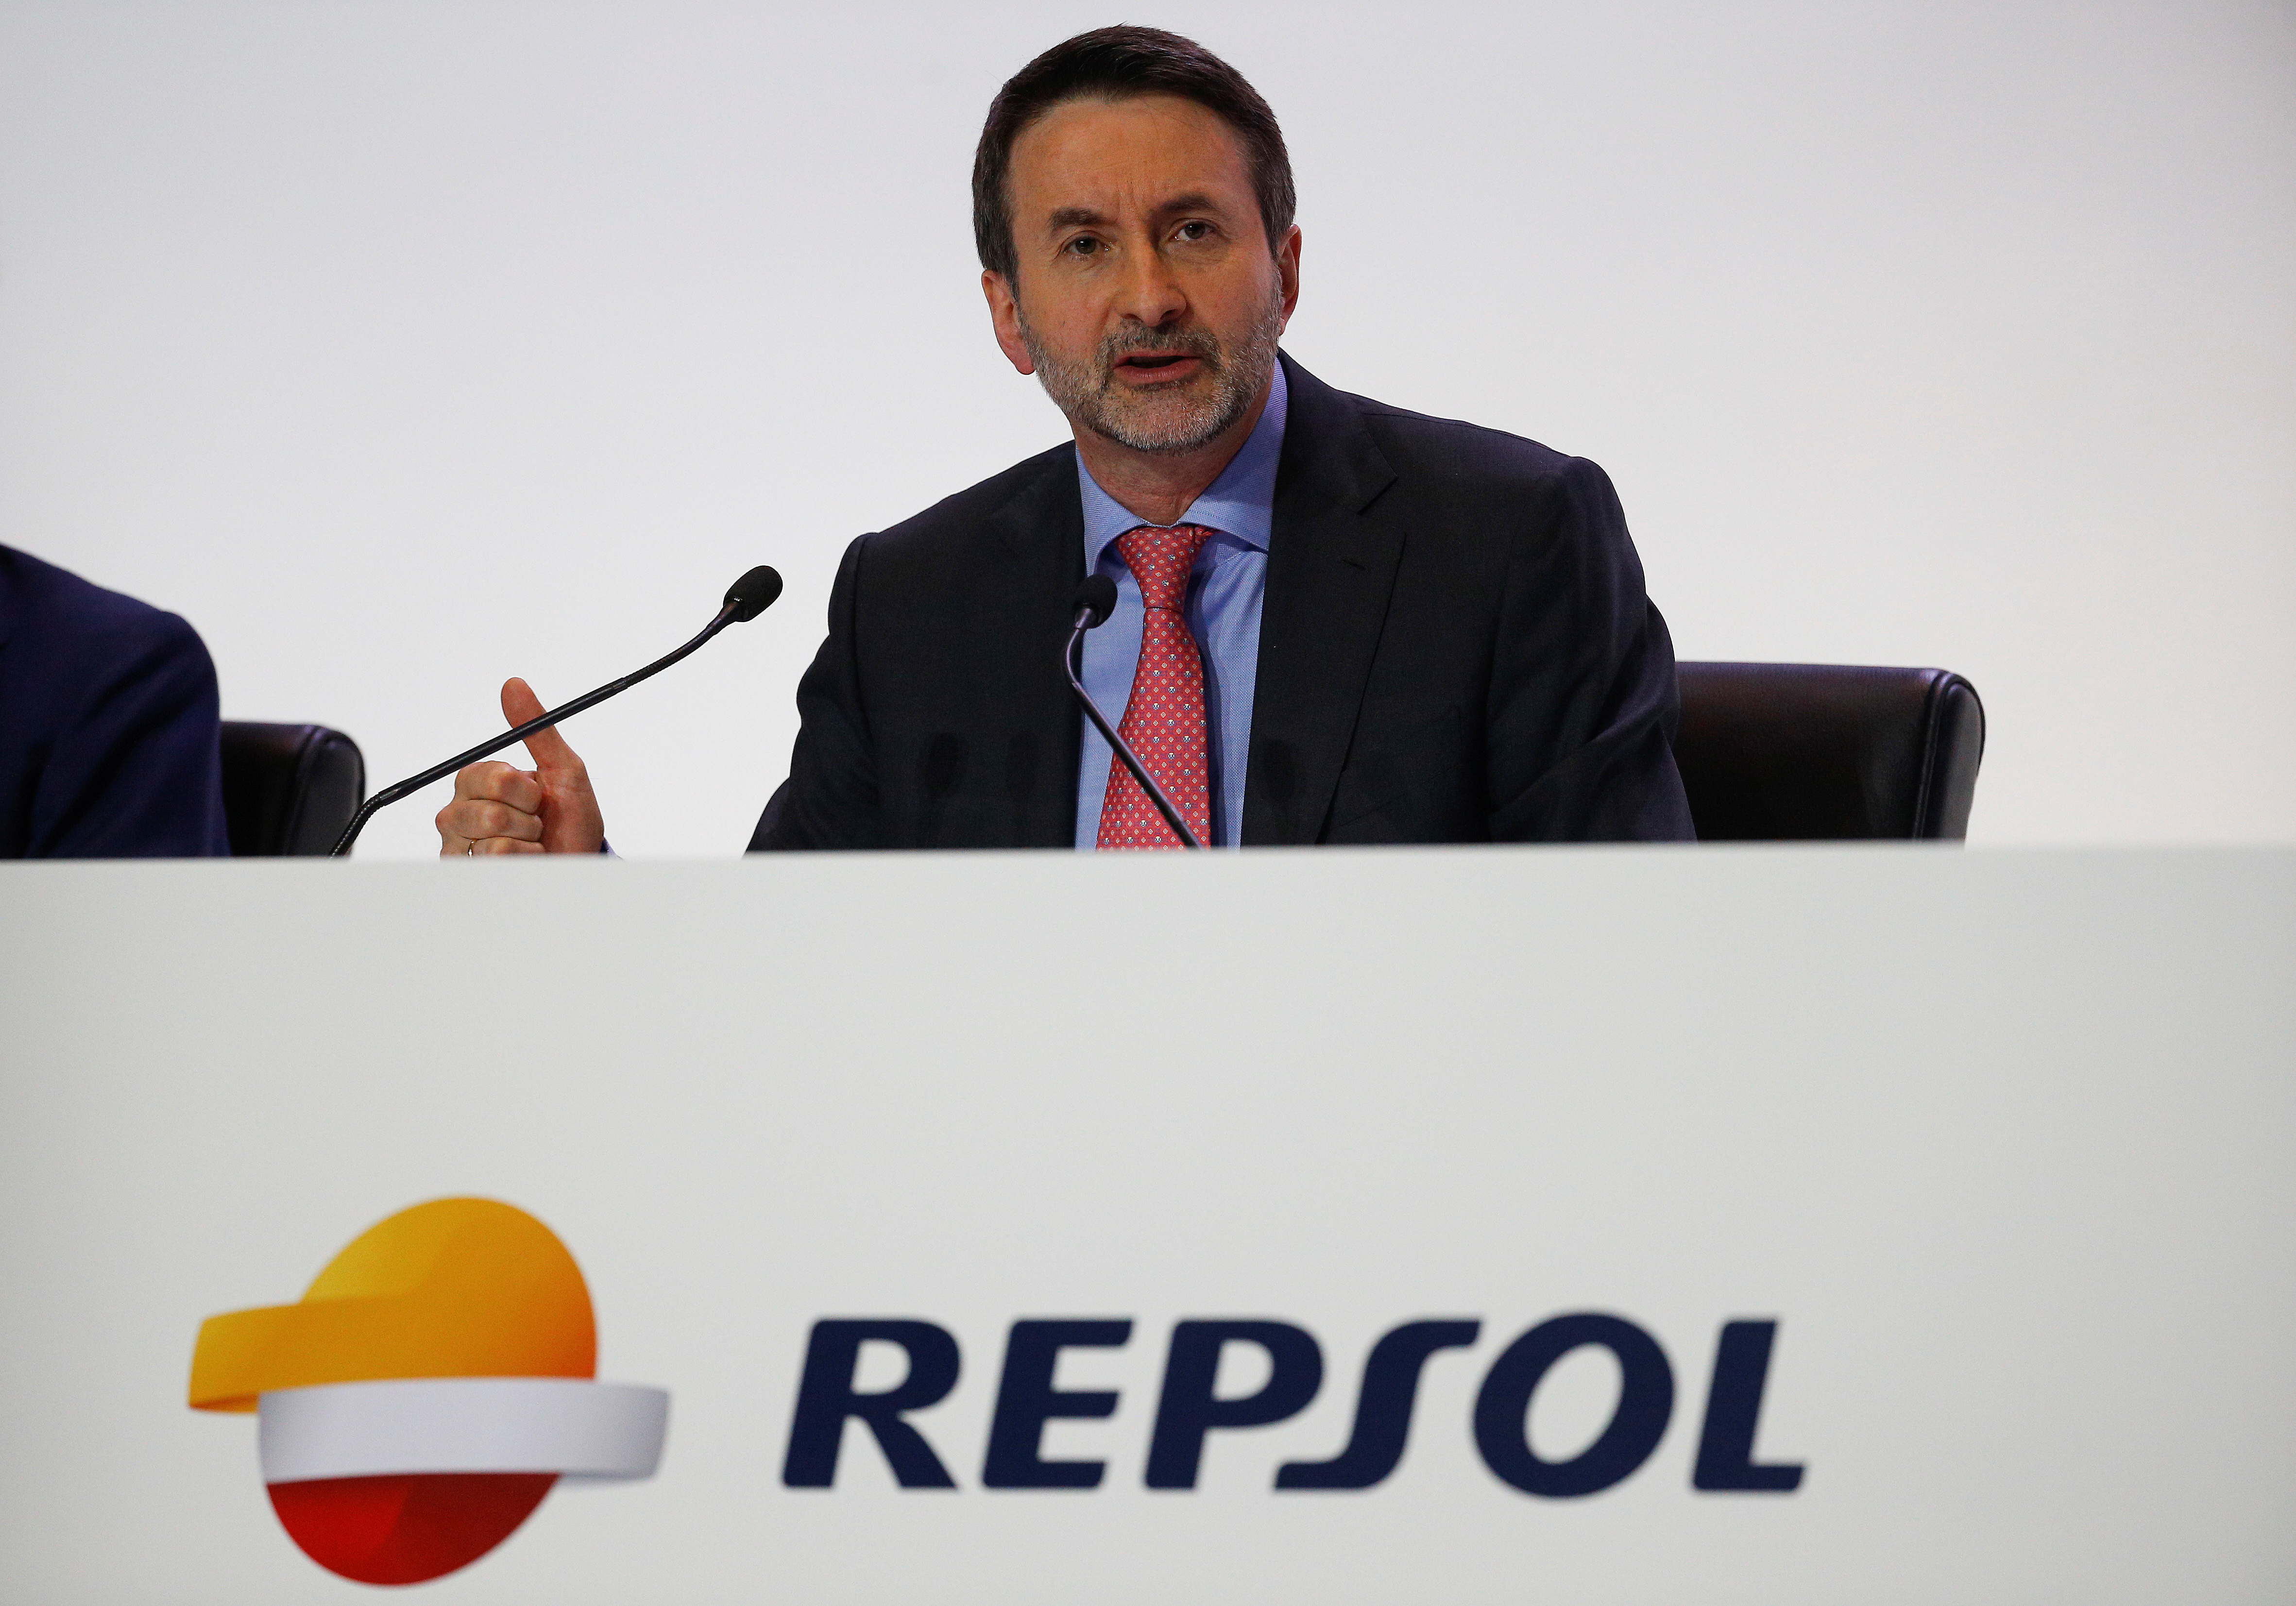 Repsol CEO Josu Jon Imaz delivers a speech during the annual shareholders meeting in Madrid